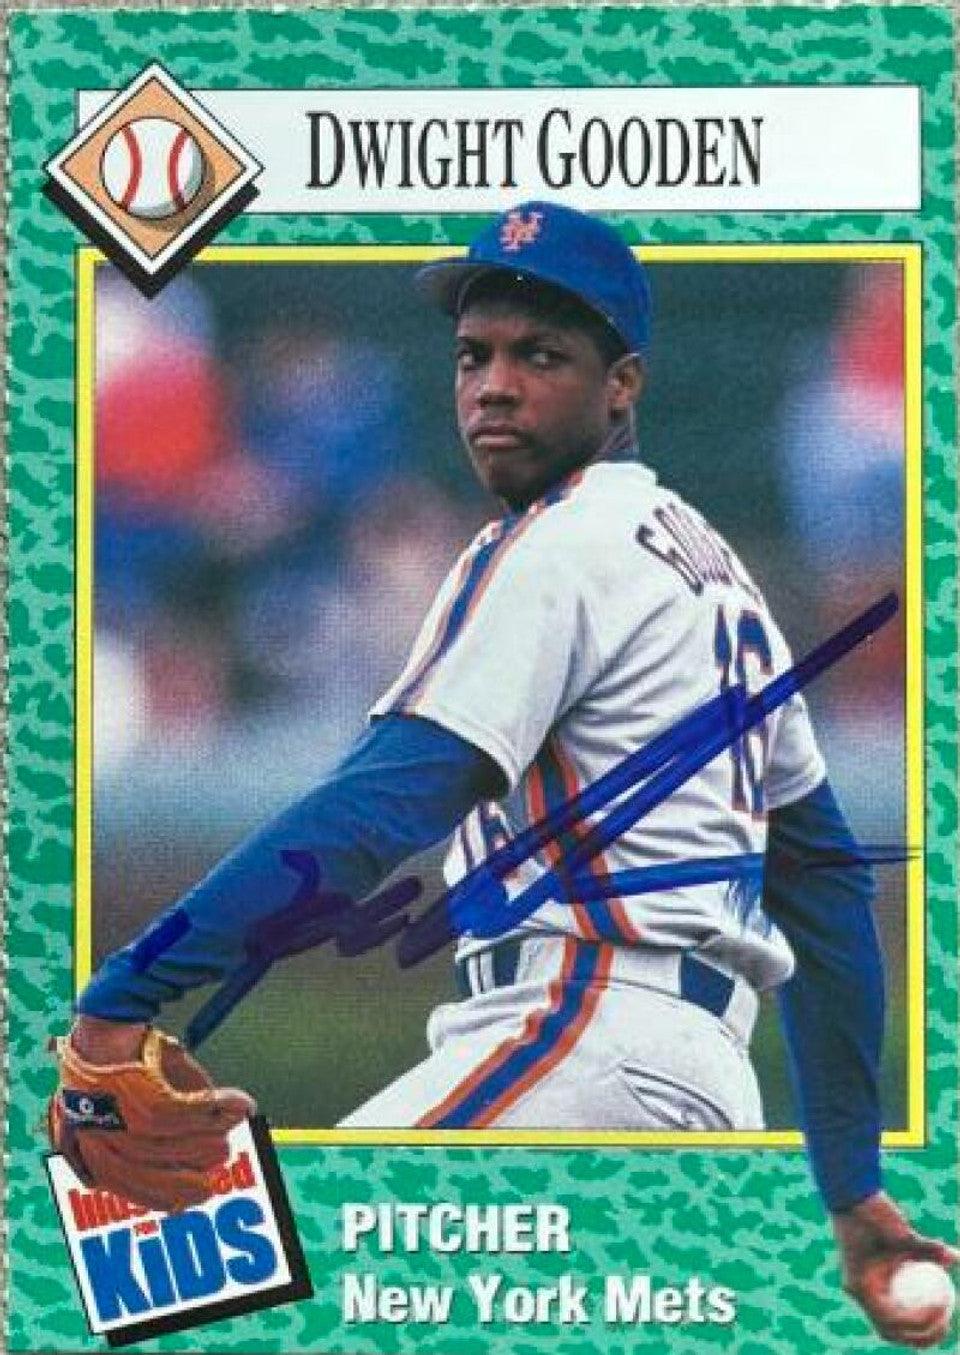 Dwight Gooden Signed 1990 Sports Illustrated for Kids Baseball Card - New York Mets - PastPros